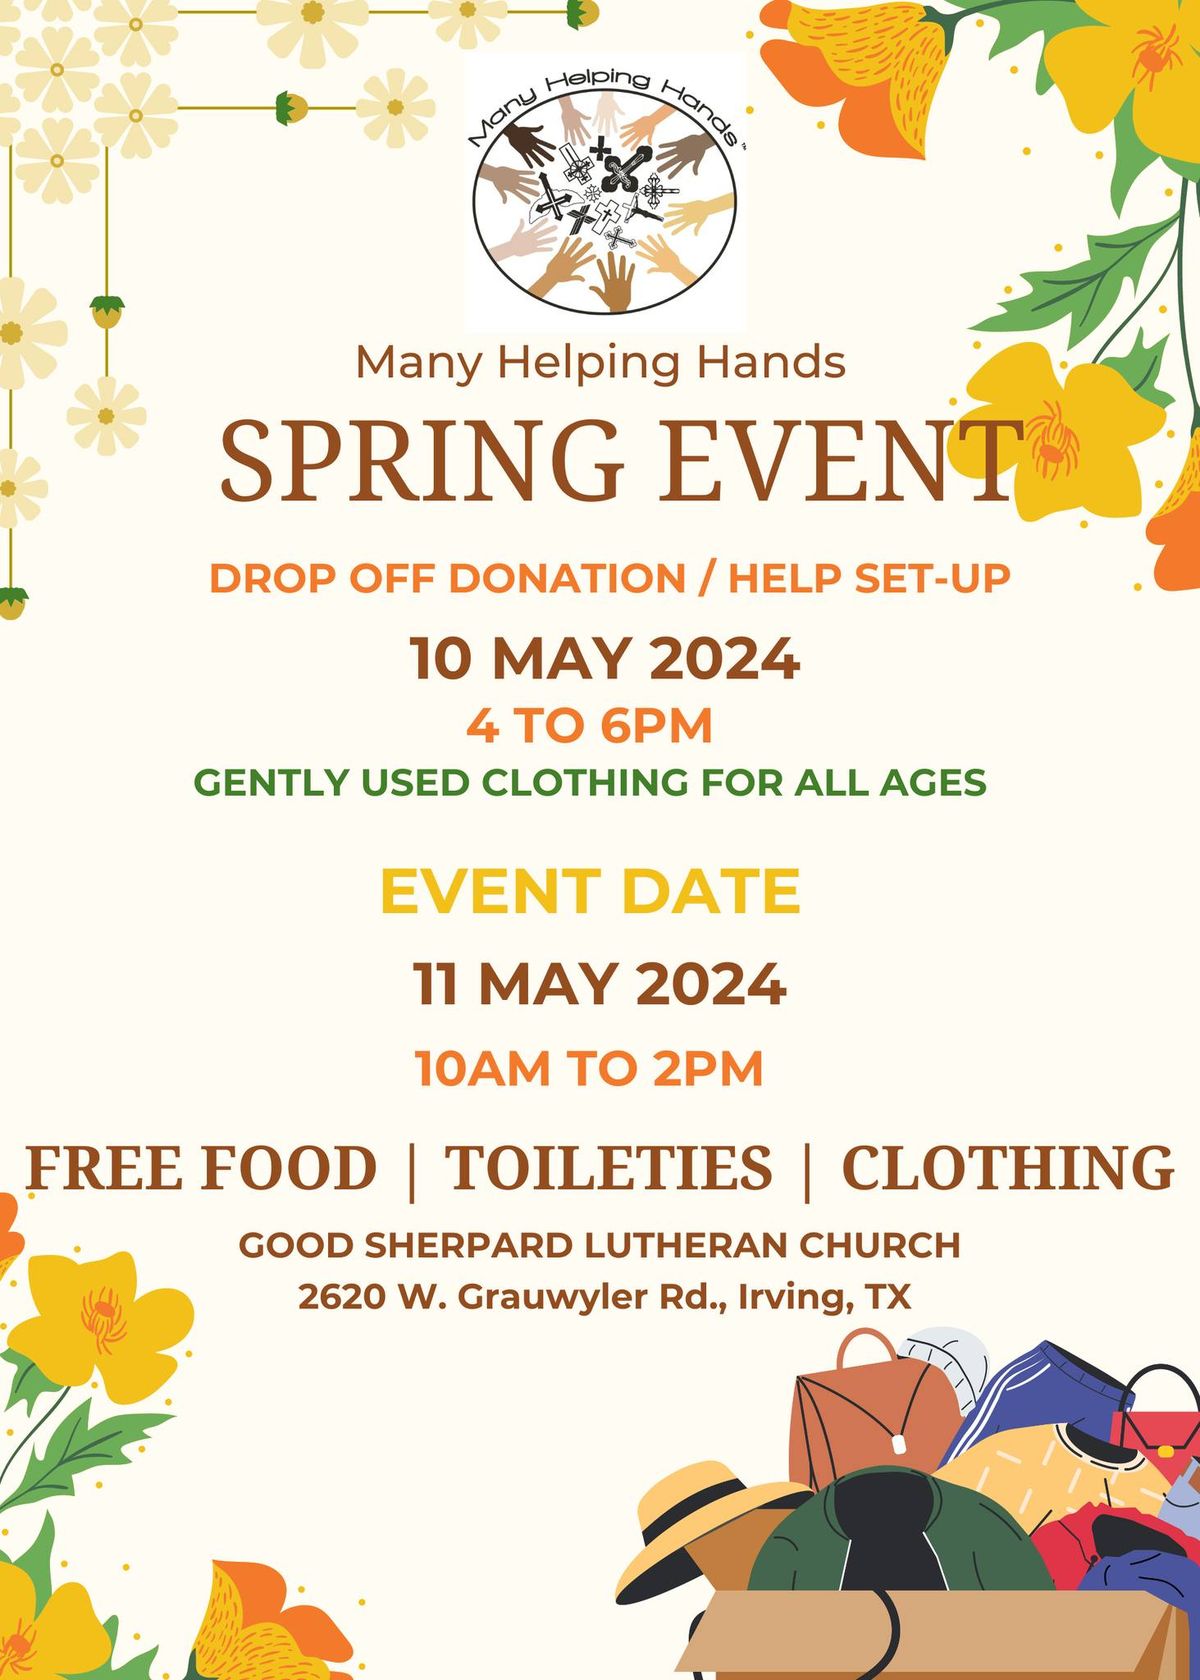 MHH Annual Spring Clothing Drive\/Give Away Event